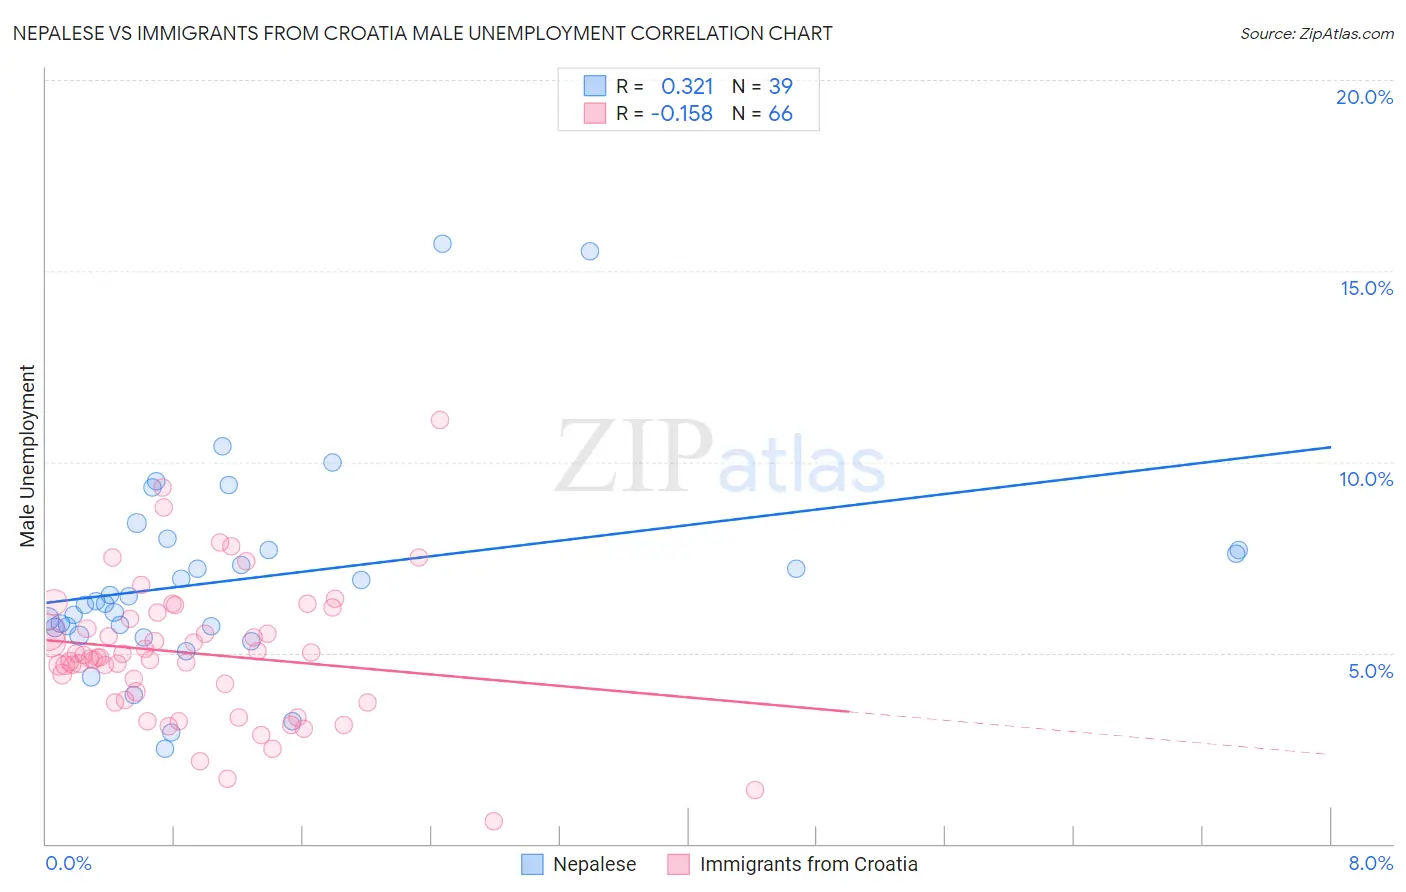 Nepalese vs Immigrants from Croatia Male Unemployment